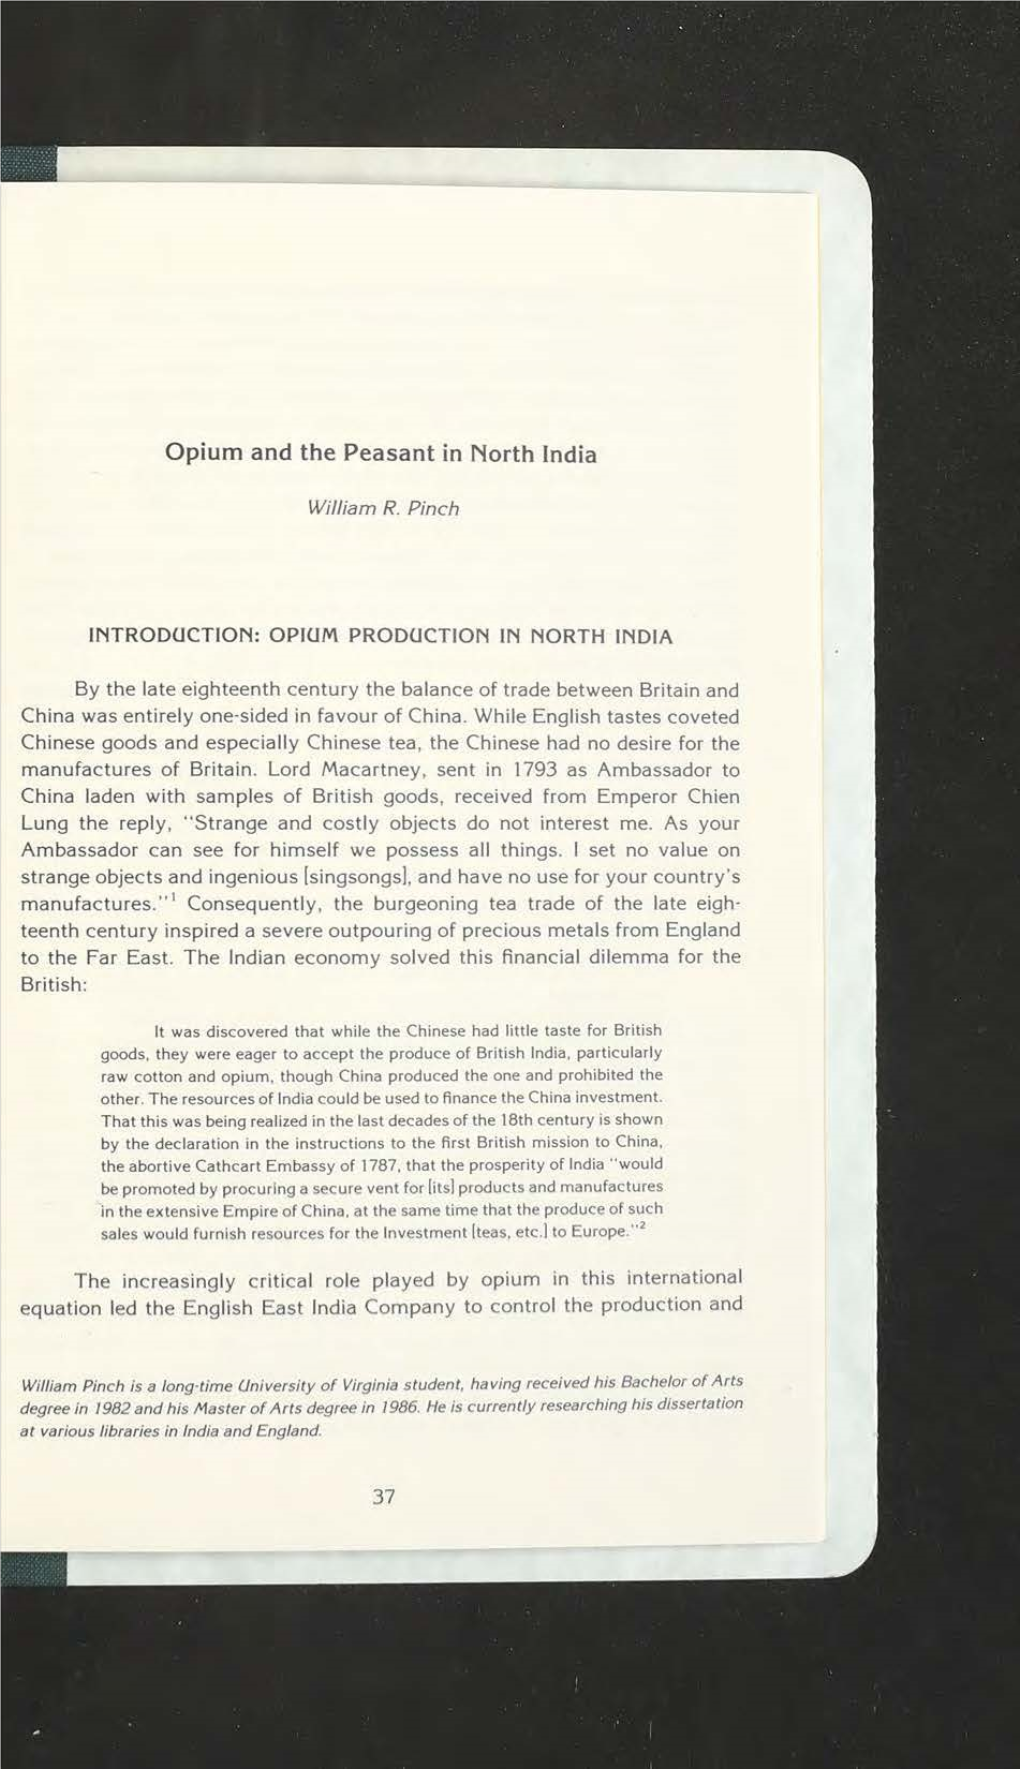 Opium and the Peasant in North India